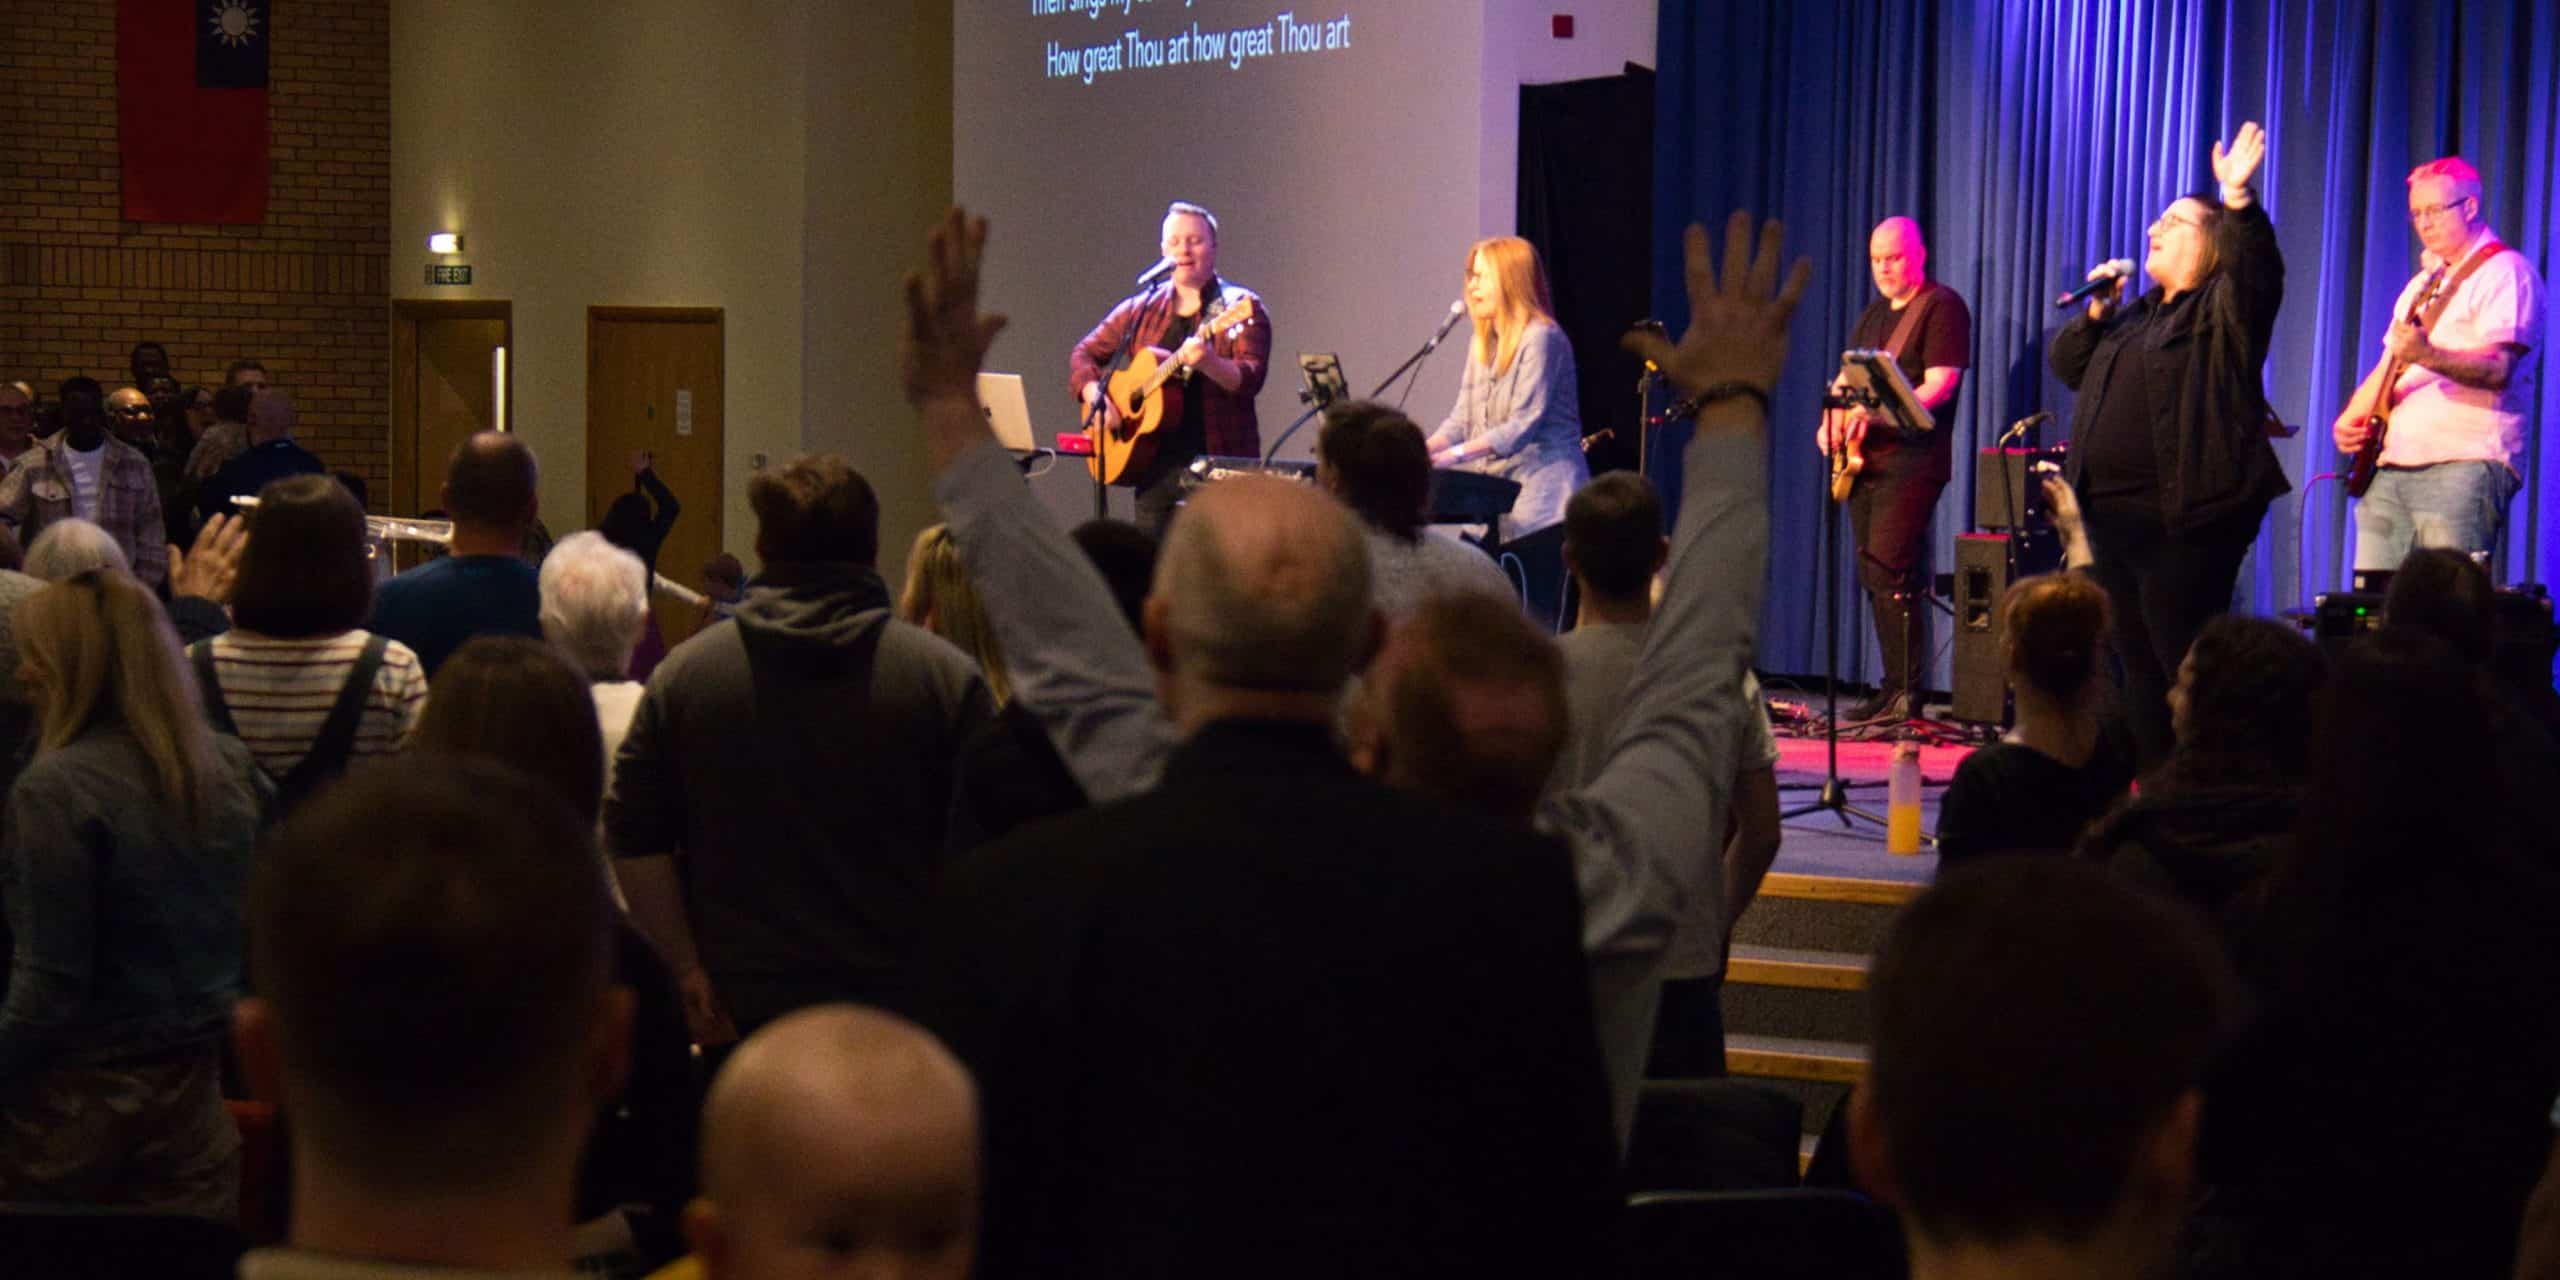 The congregation at TVCC worshipping, some with hands raised. The TVCC worship team is leading a song on the stage.